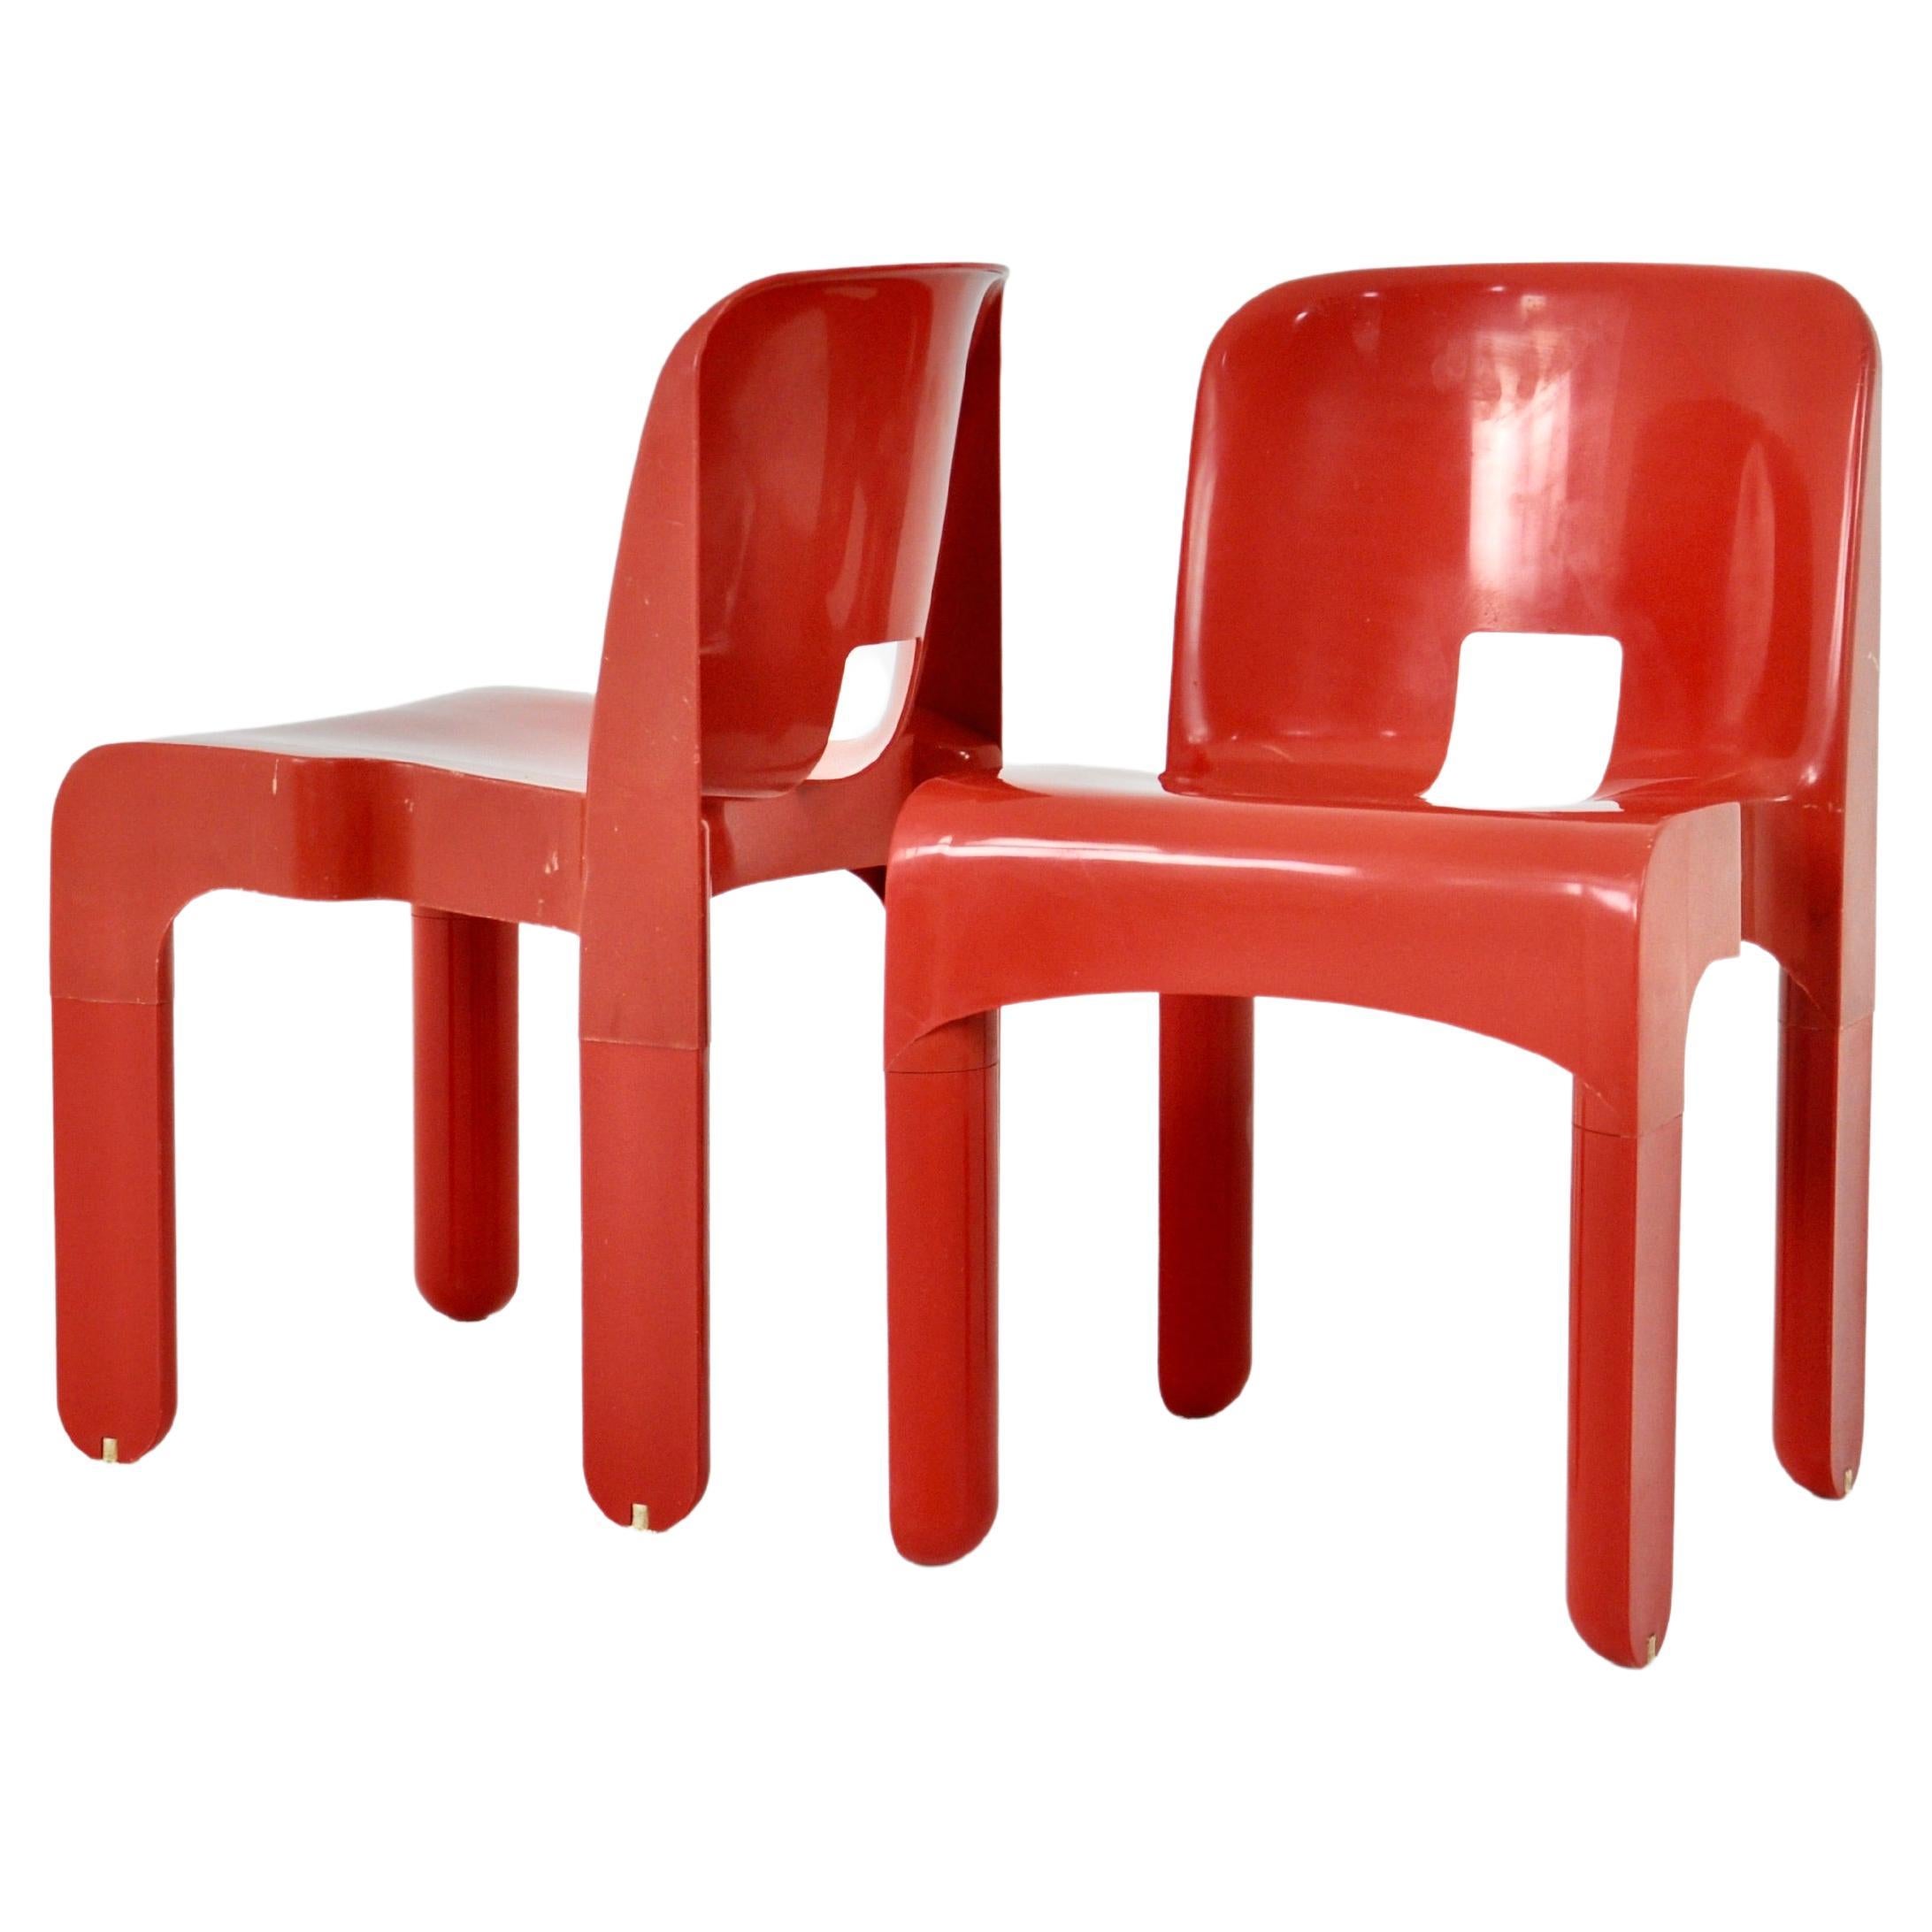 Model 4867 chairs by Joe Colombo for Kartell, 1970S, set of 2 For Sale